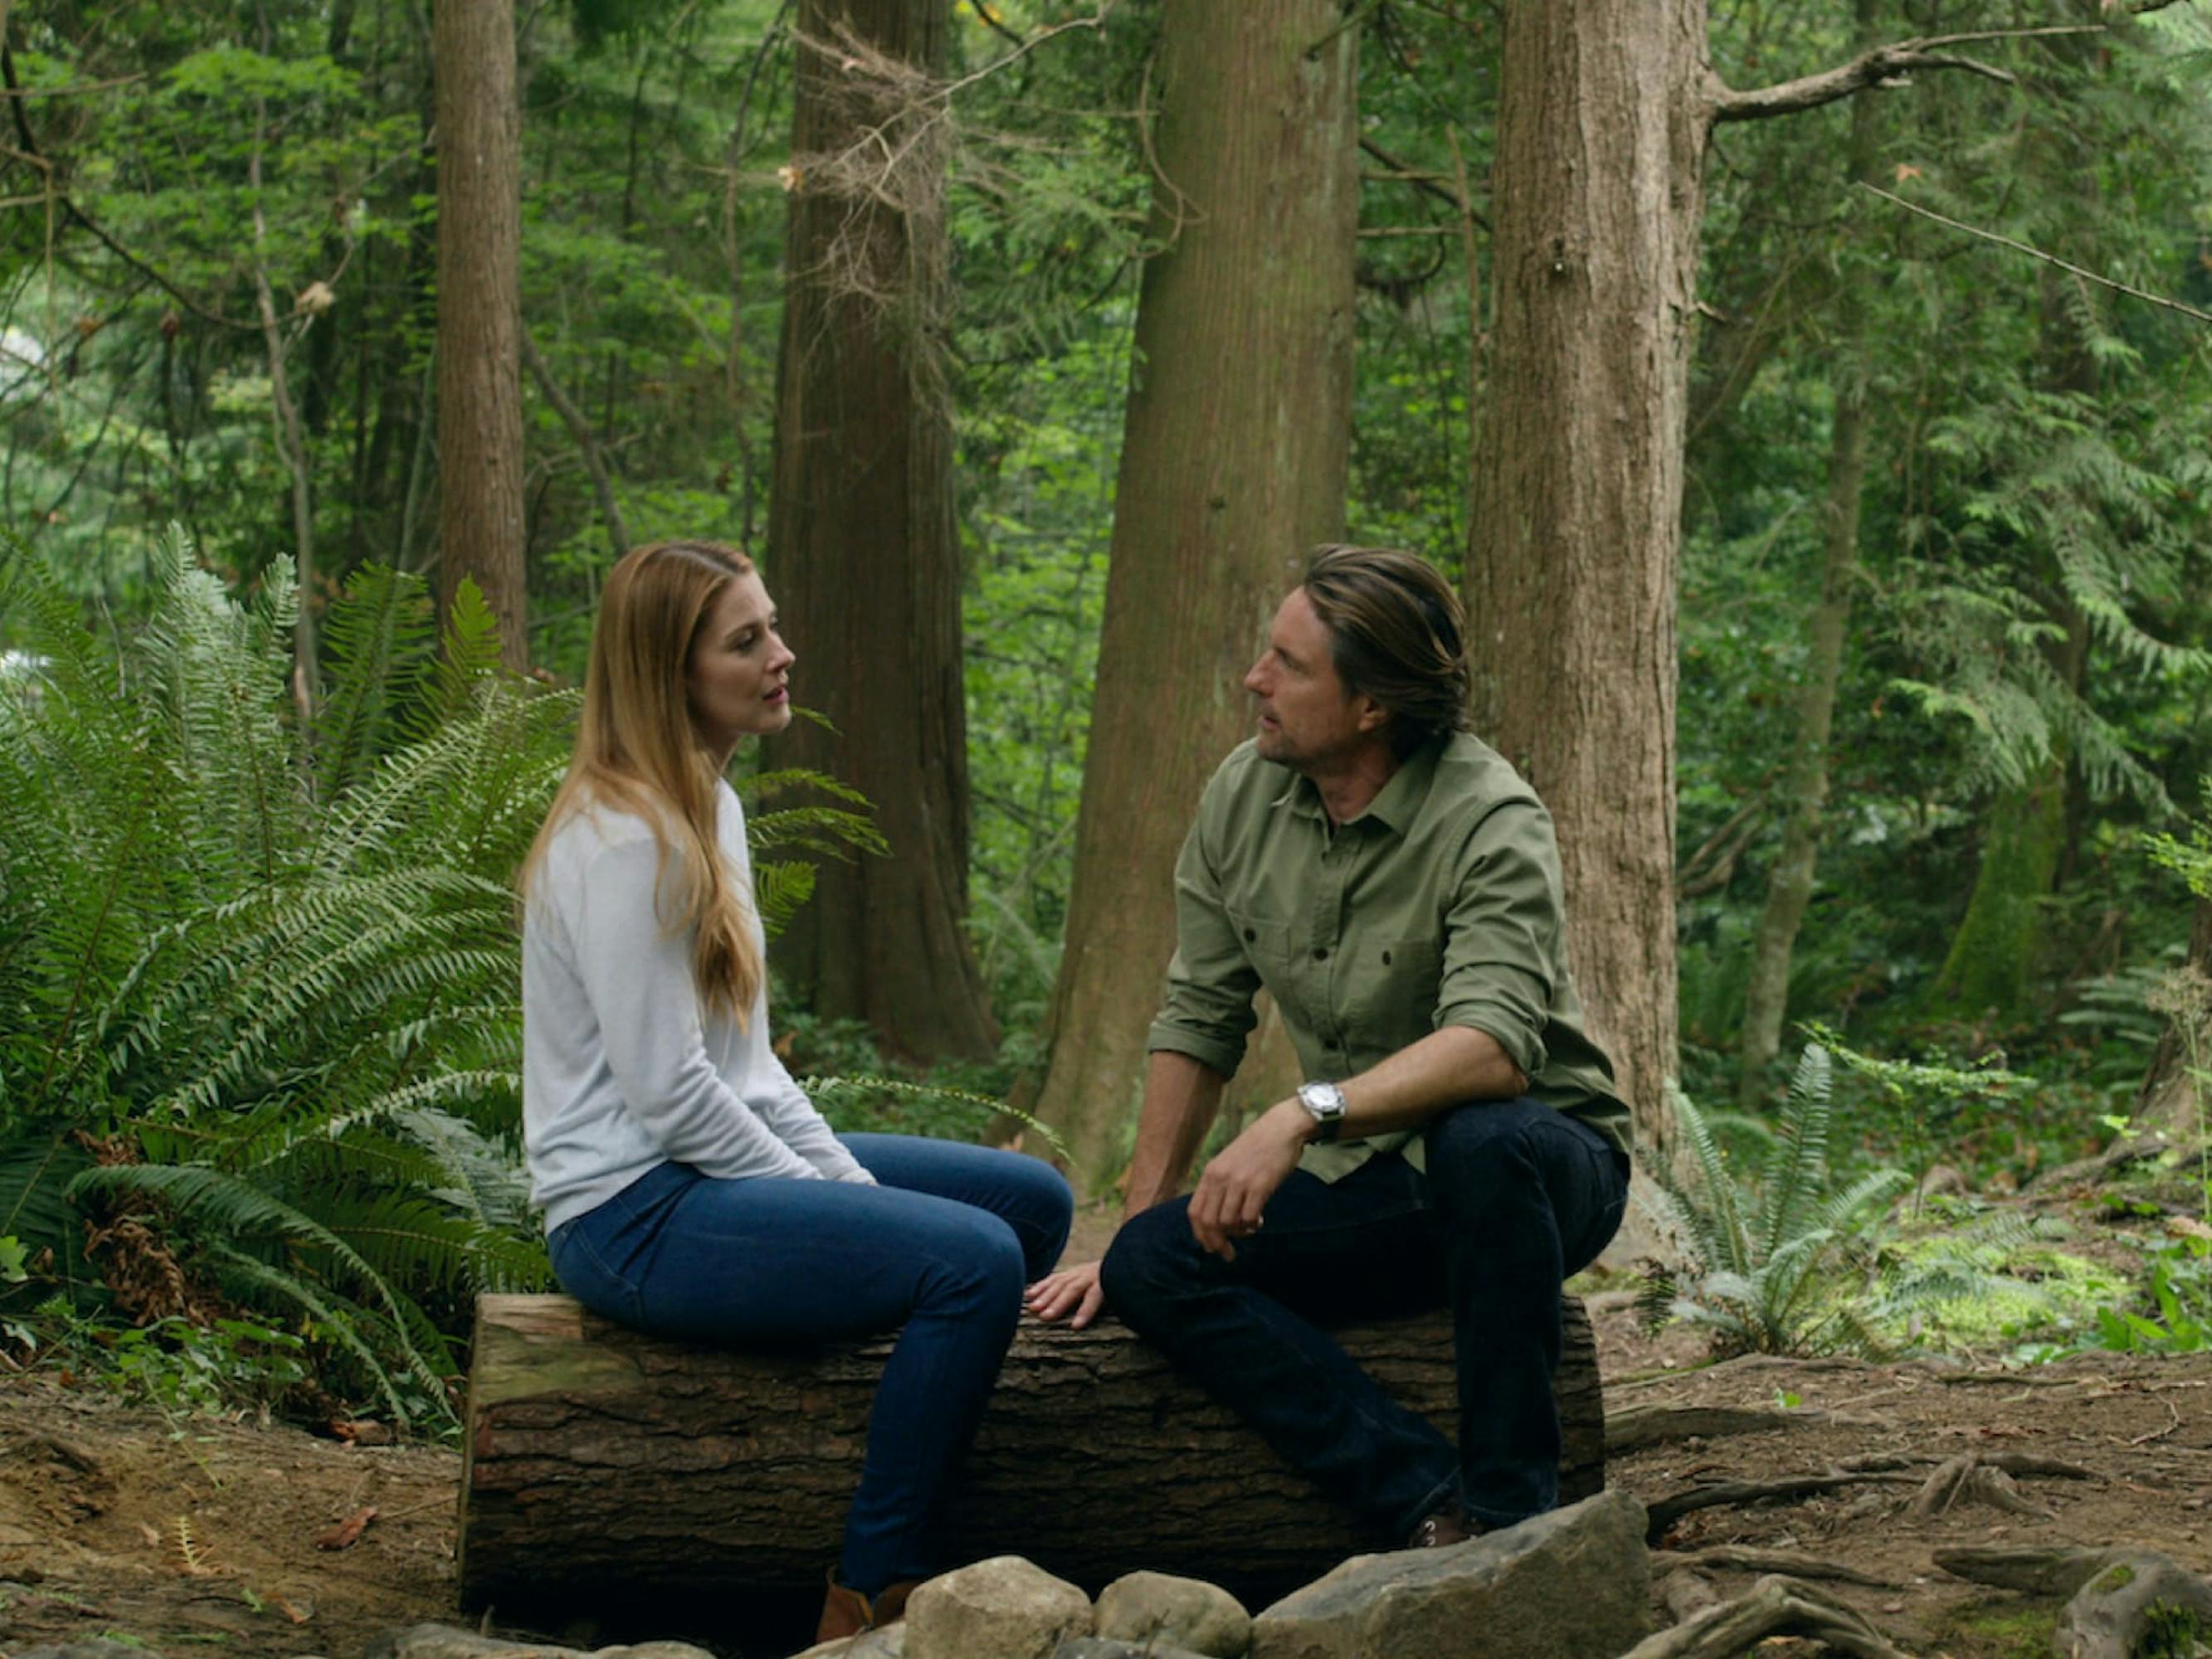 Melinda Monroe (Alexandra Breckenridge) and Jack Sheridan (Martin Henderson) sit on a log in the middle of a forest. She wears a white shirt and jeans, and he wears a green shirt and jeans.